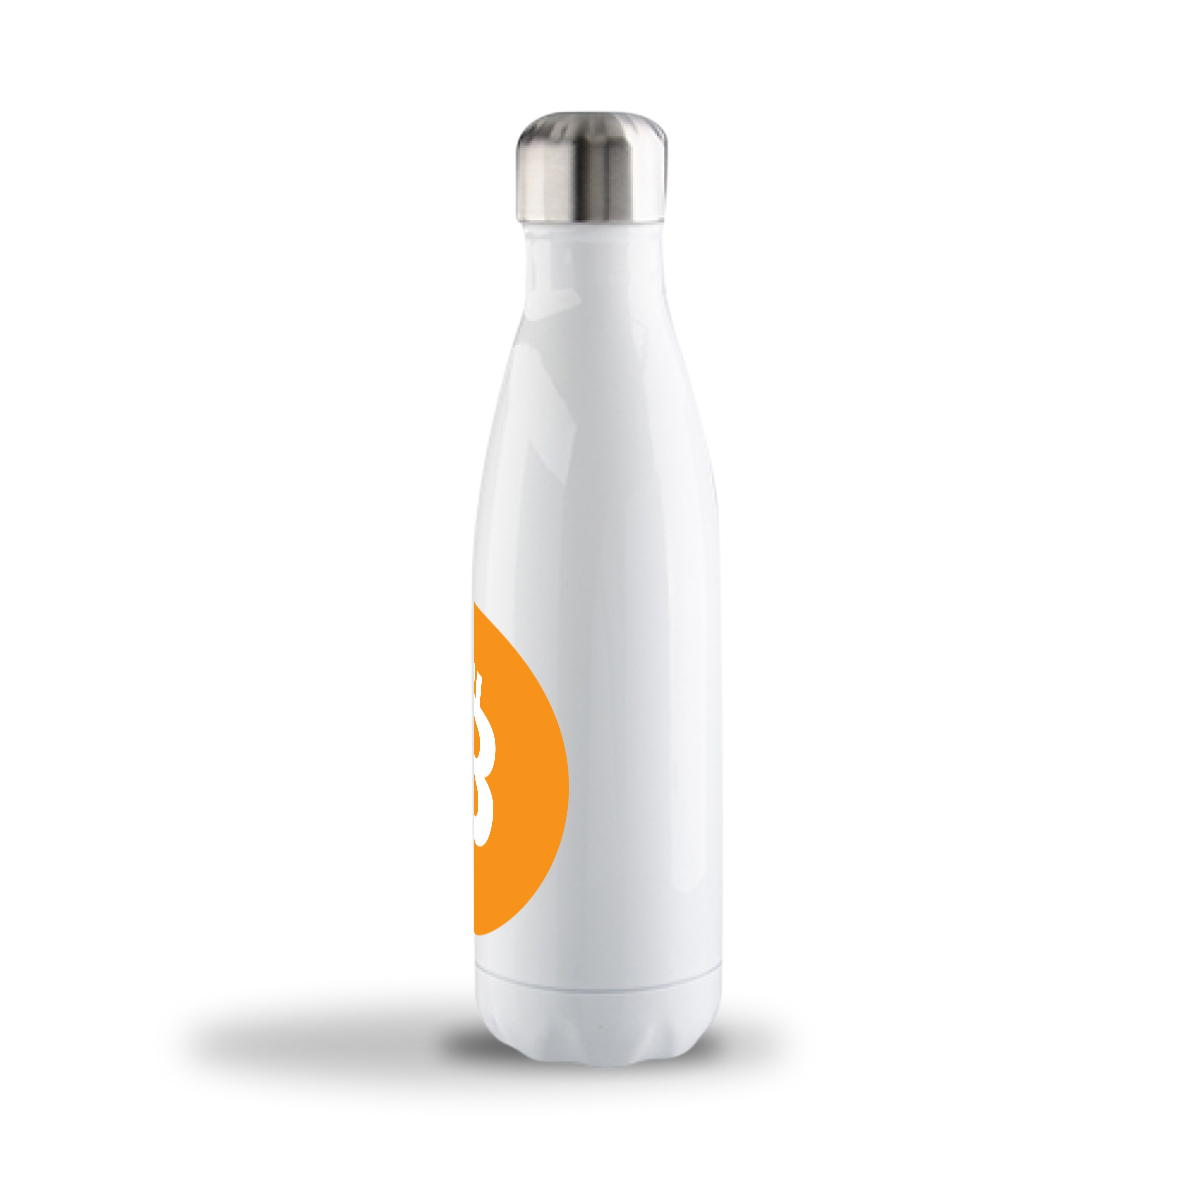 Bitcoin White bottle with stainless steel interior